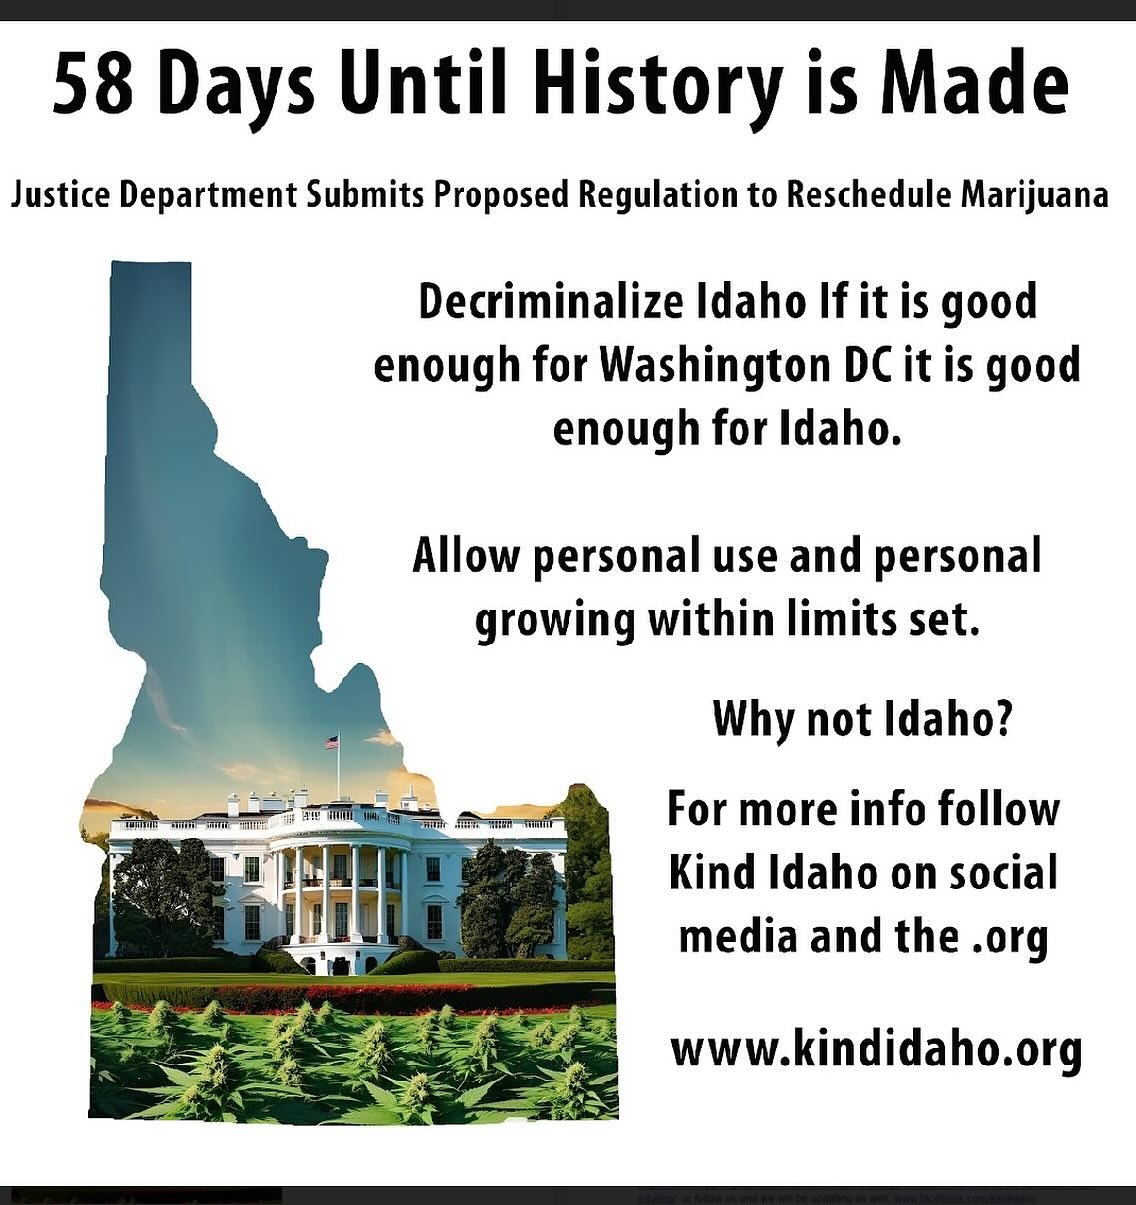 Estimated 58 days until we should get the rescheduling of cannabis federally from schedule 1 to schedule 3 and America finally acknowledges what most of the world has already accepted. Cannabis is a safe substance with healthful benefits. 
Idaho is v